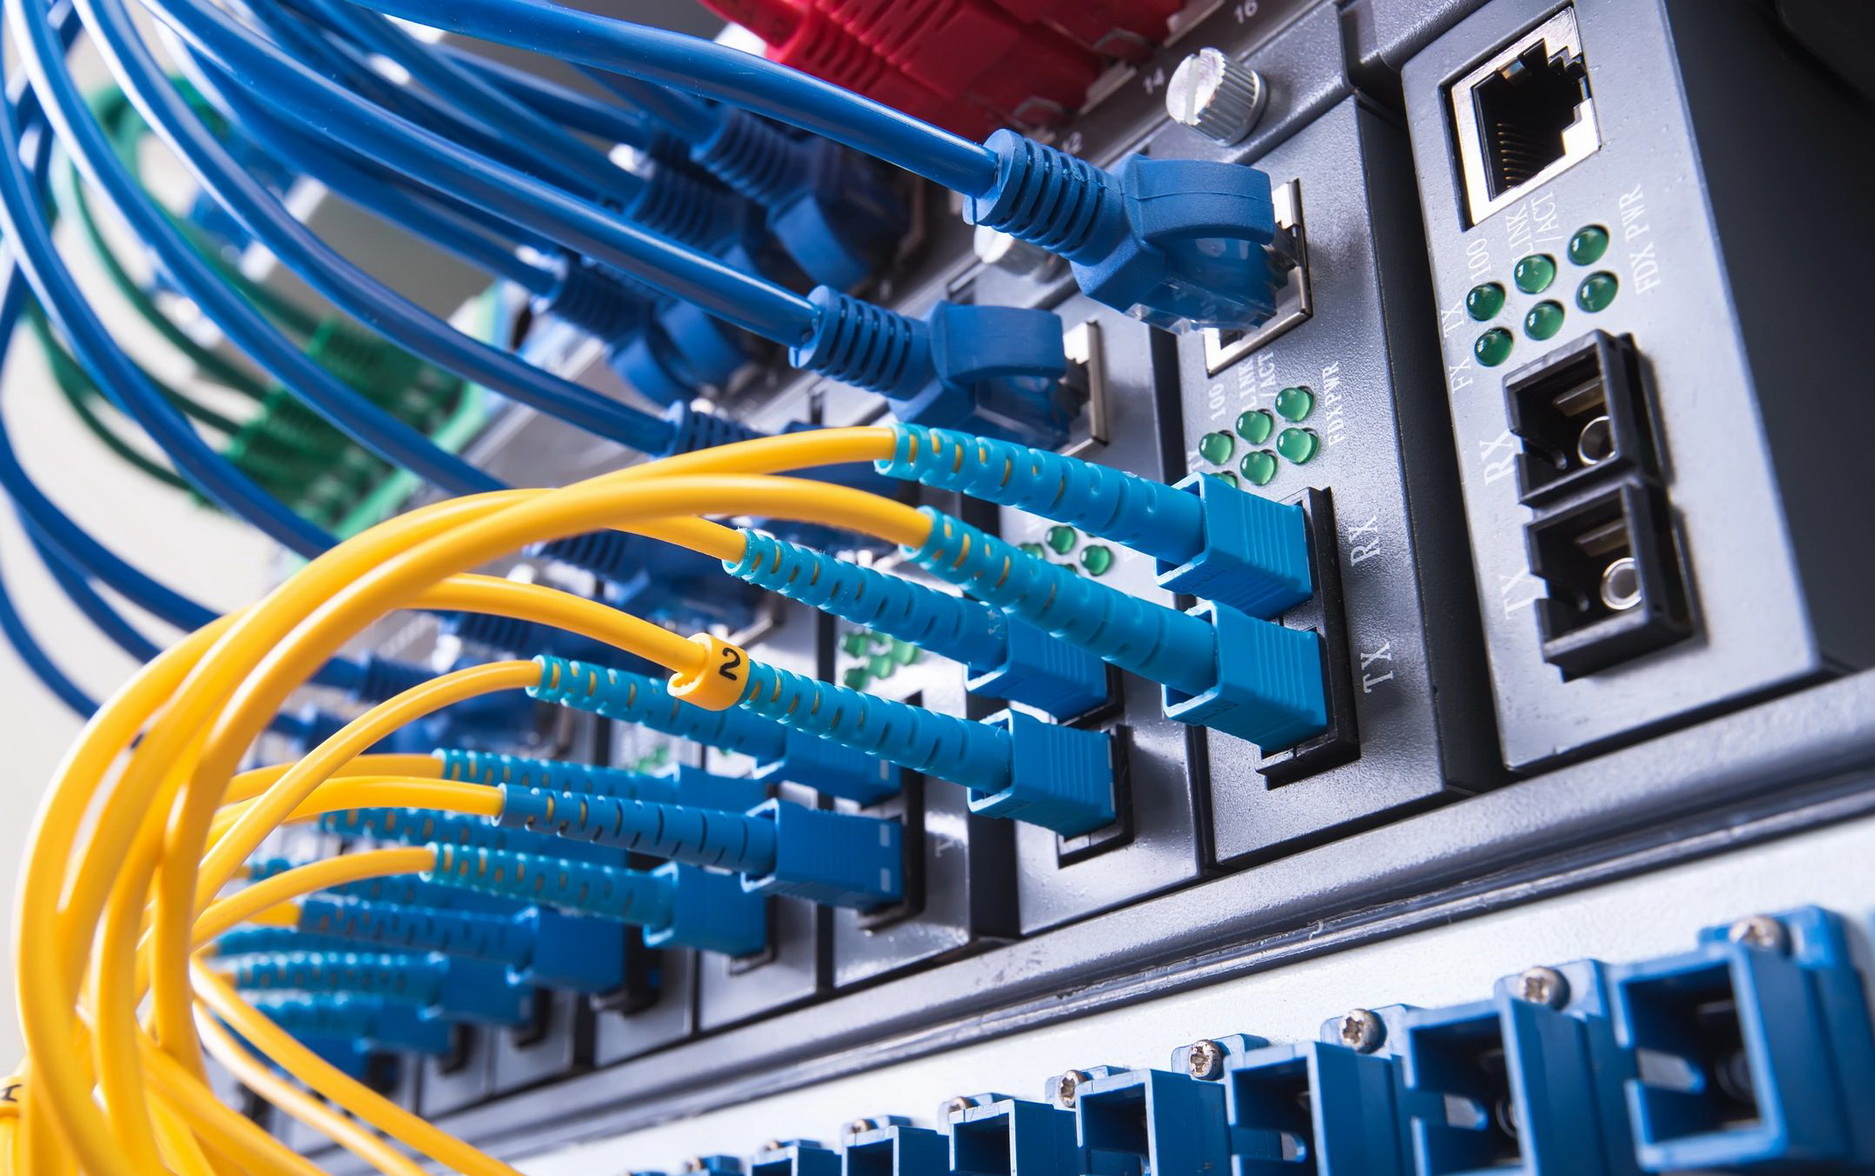 Structured Internet Computer Data Voice Telephone VoIP Network Cabling Wiring Installers for Office Commercial CAT5e & CAT6 - Jacksonville, FL